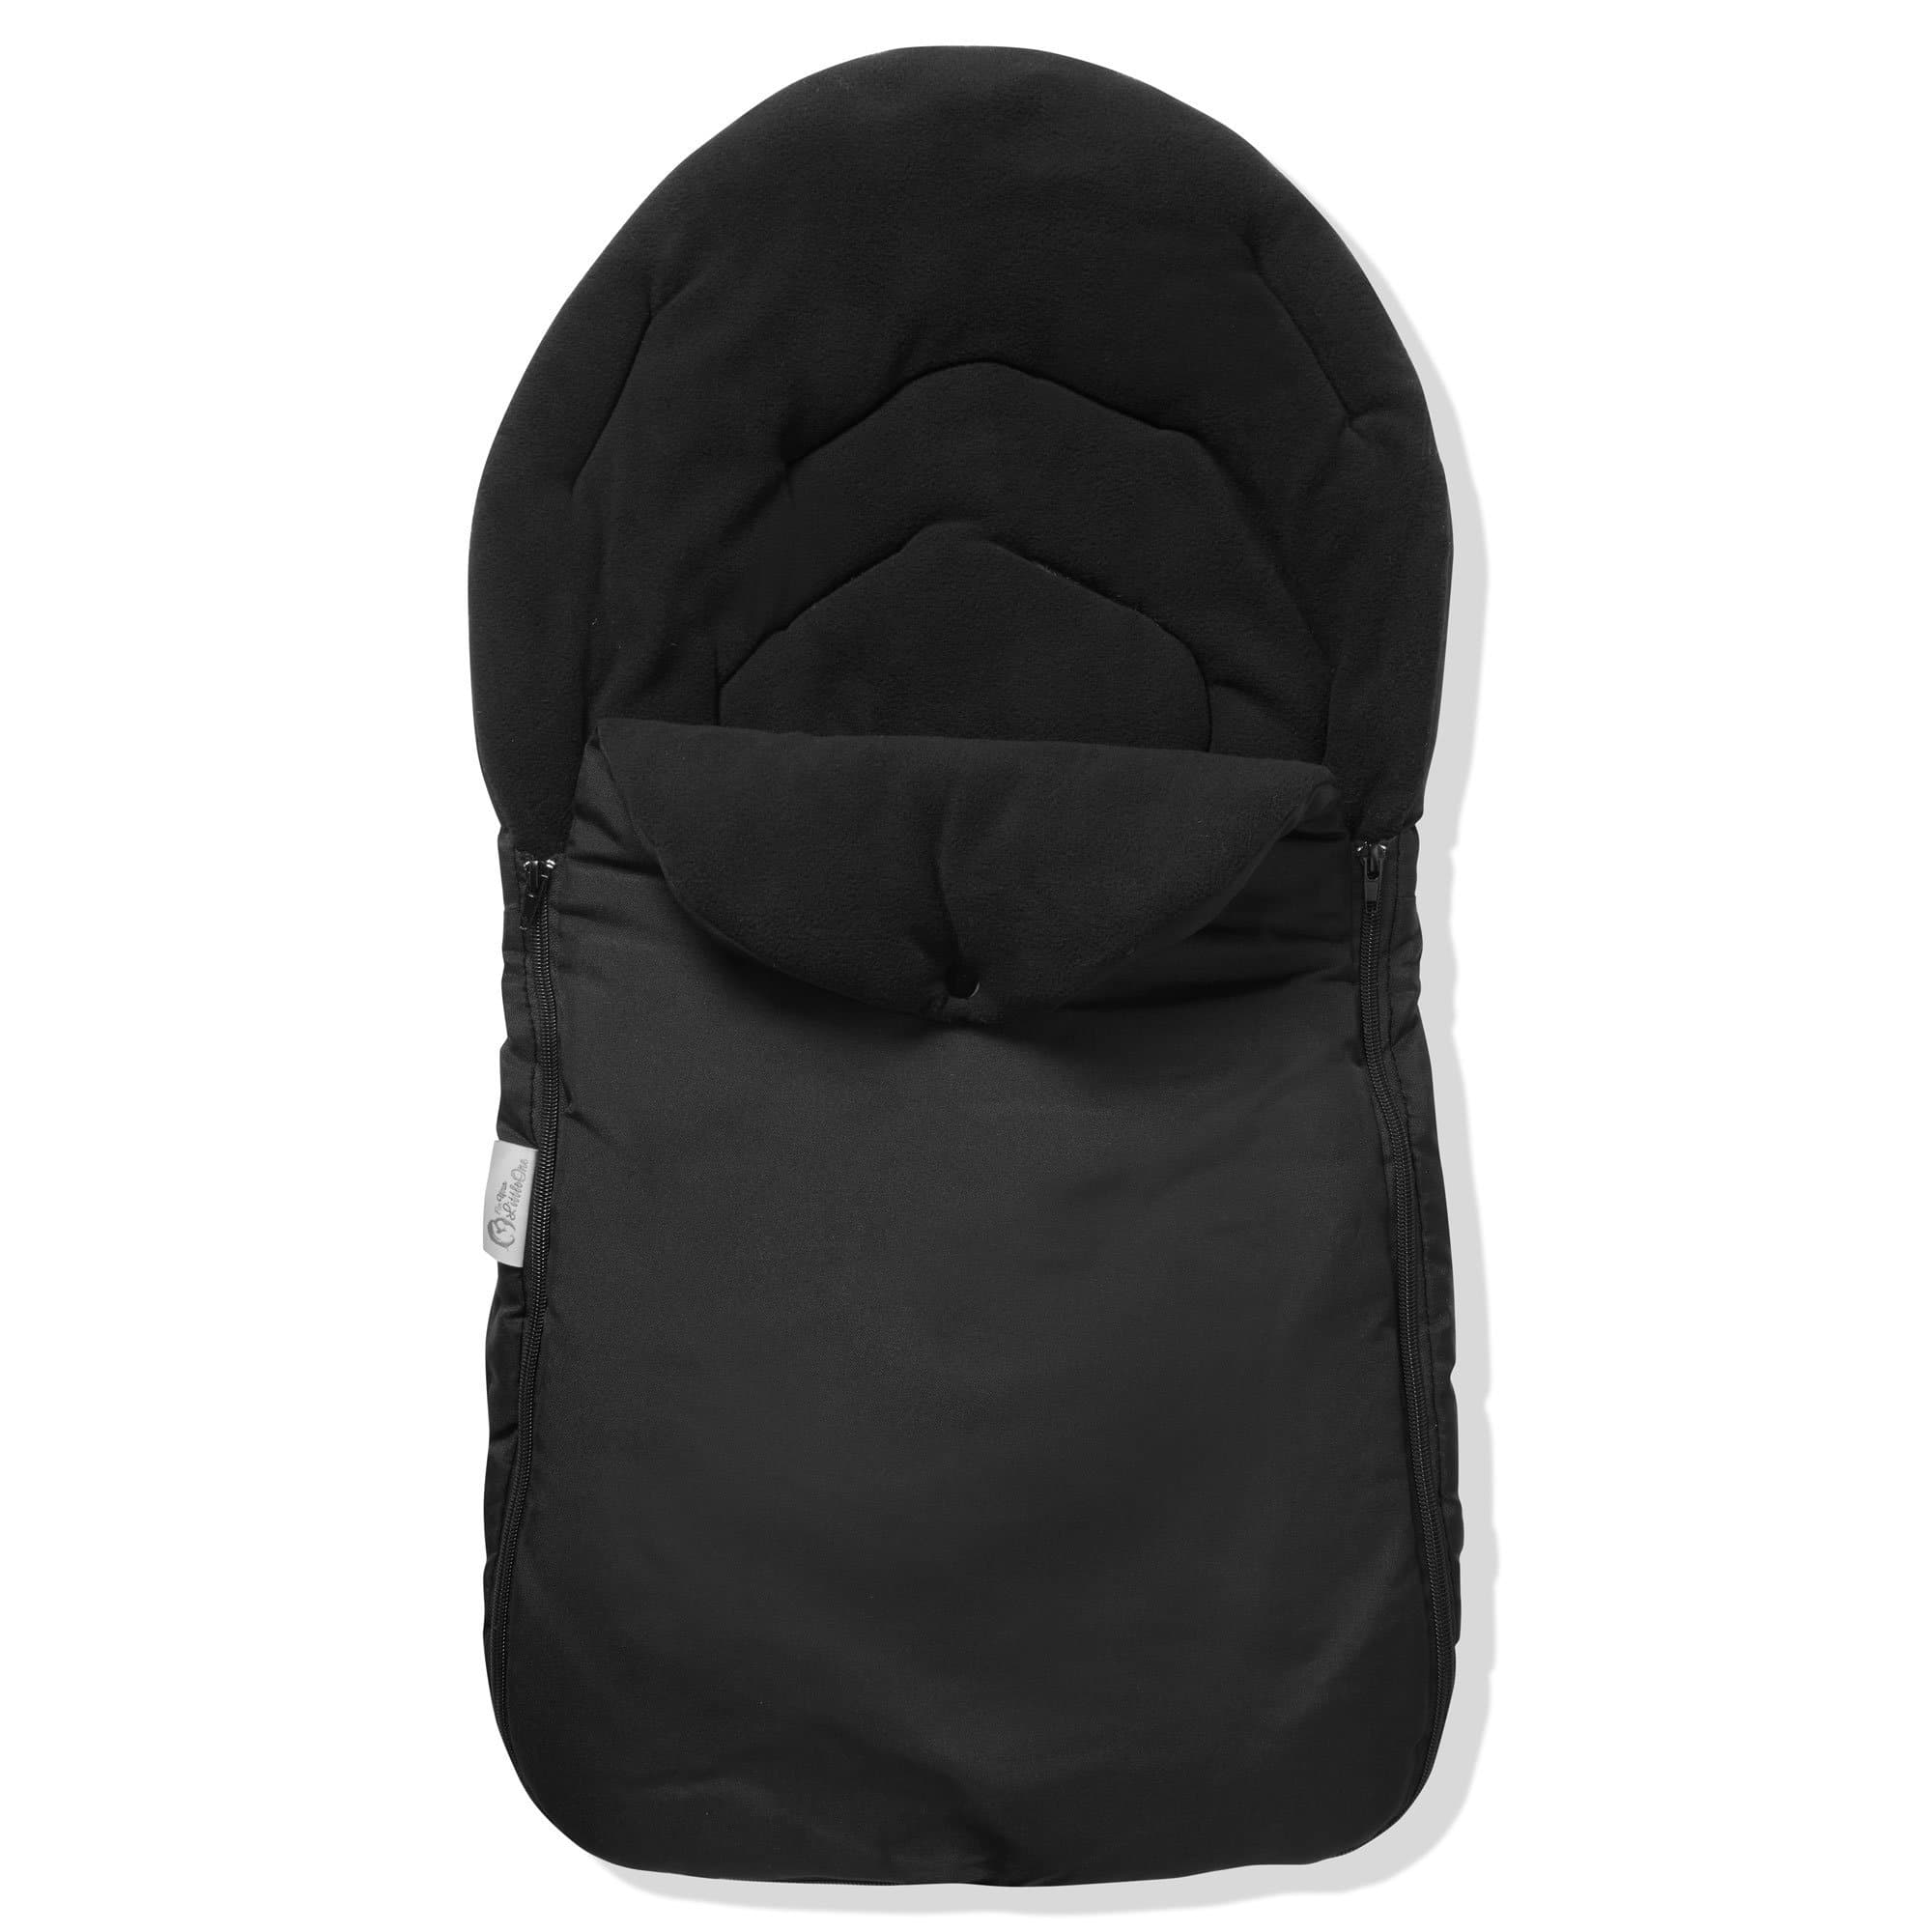 Car Seat Footmuff / Cosy Toes Compatible with GB - Black / Fits All Models | For Your Little One